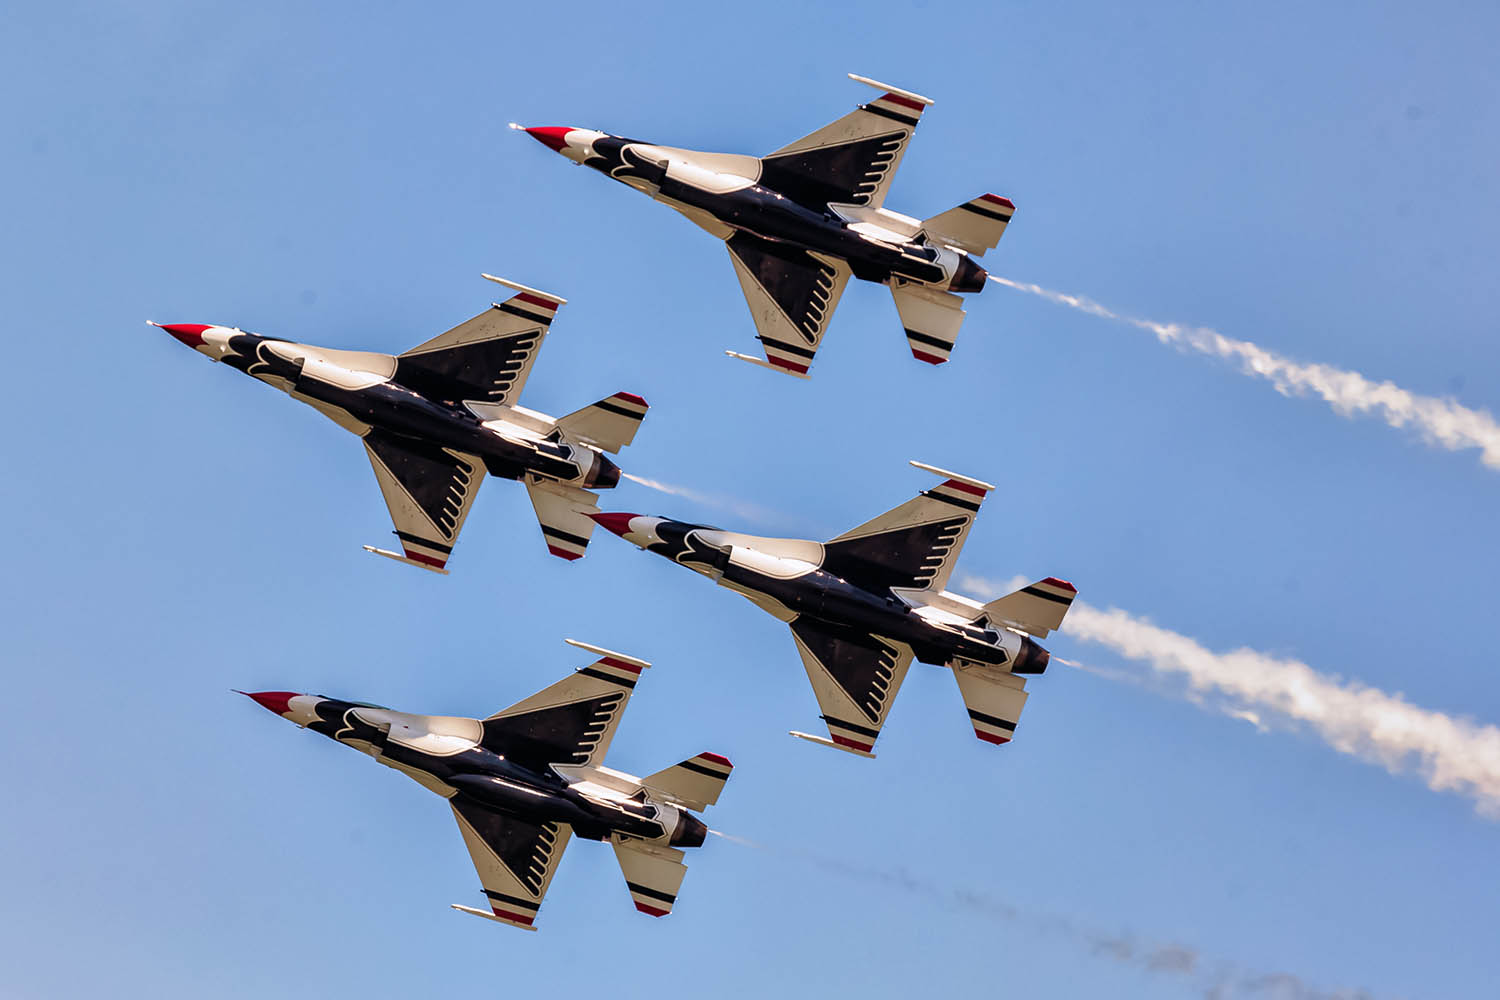 Airshow returns to Ocean City with a new roster of performers